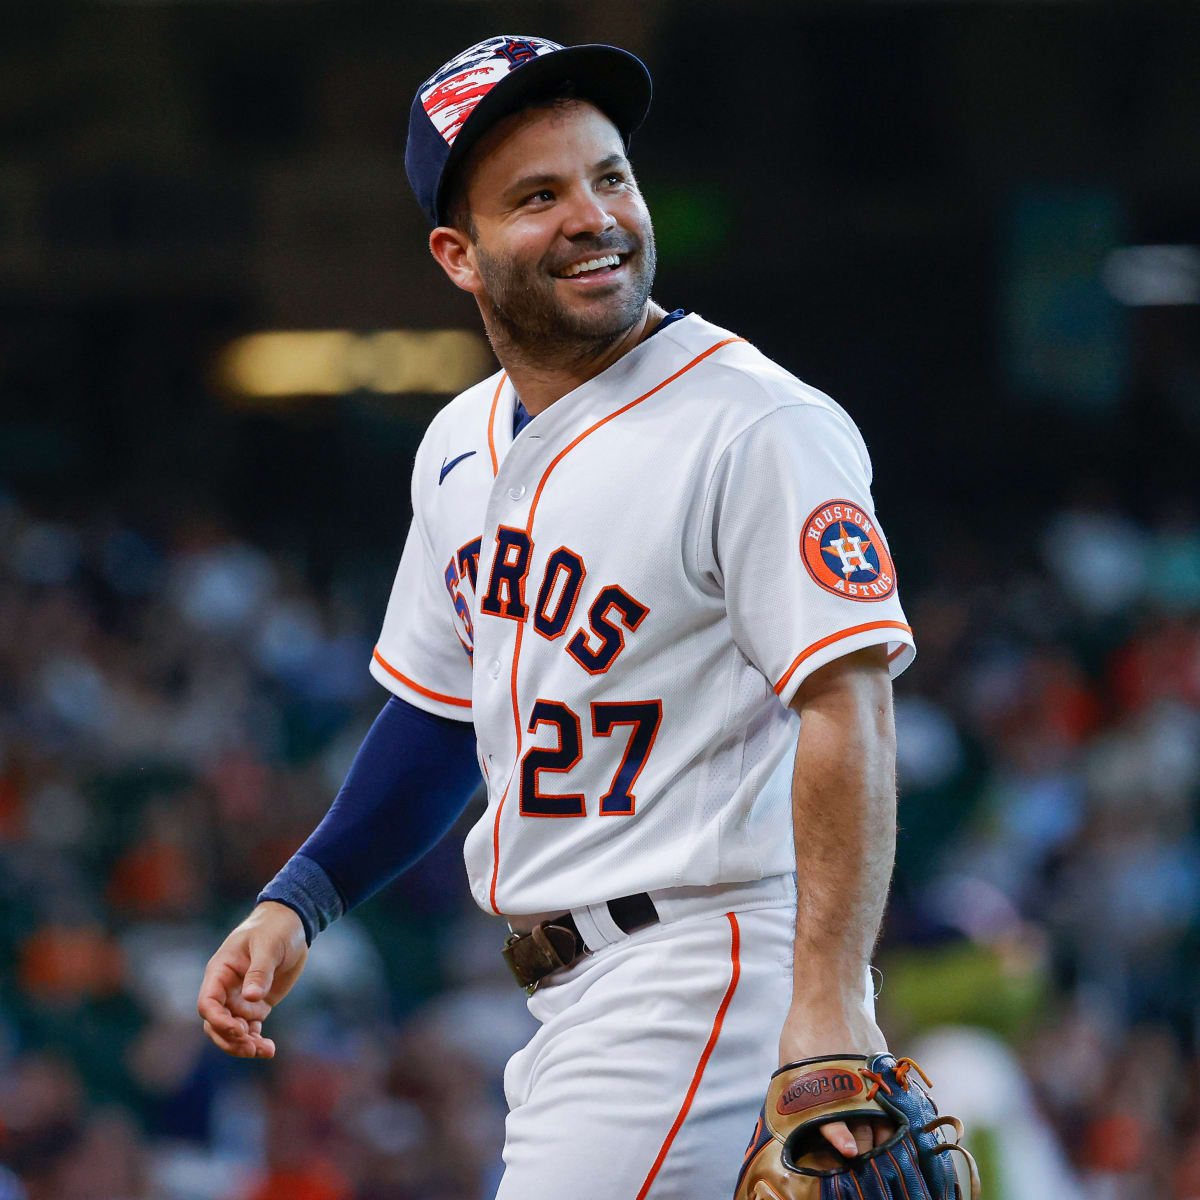 Houston Astros' Second Baseman Jose Altuve Selected to Eighth All-Star Game  - Sports Illustrated Inside The Astros